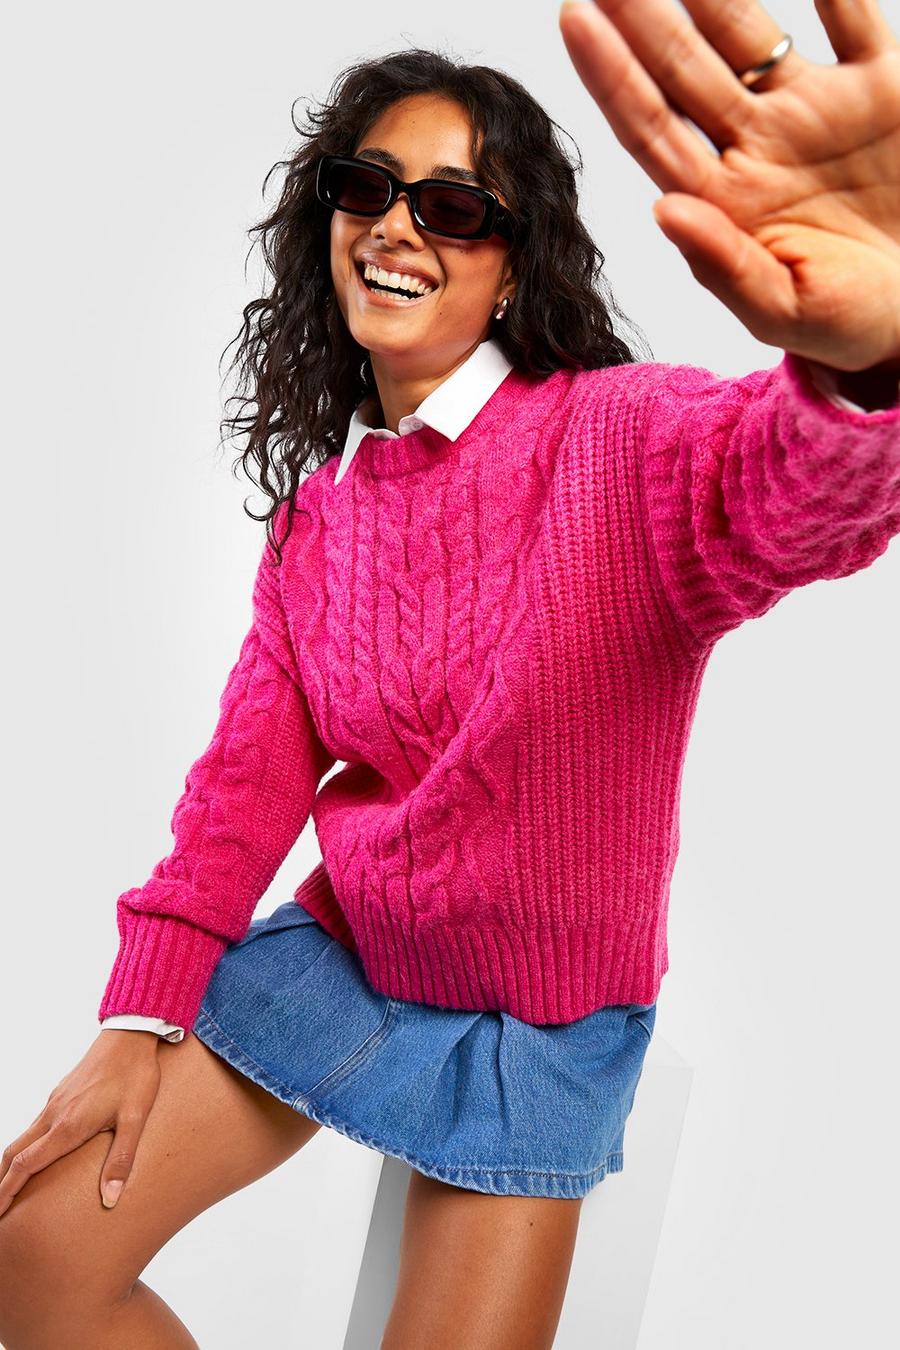 Weicher Zopfmuster-Pullover, Hot pink rosa